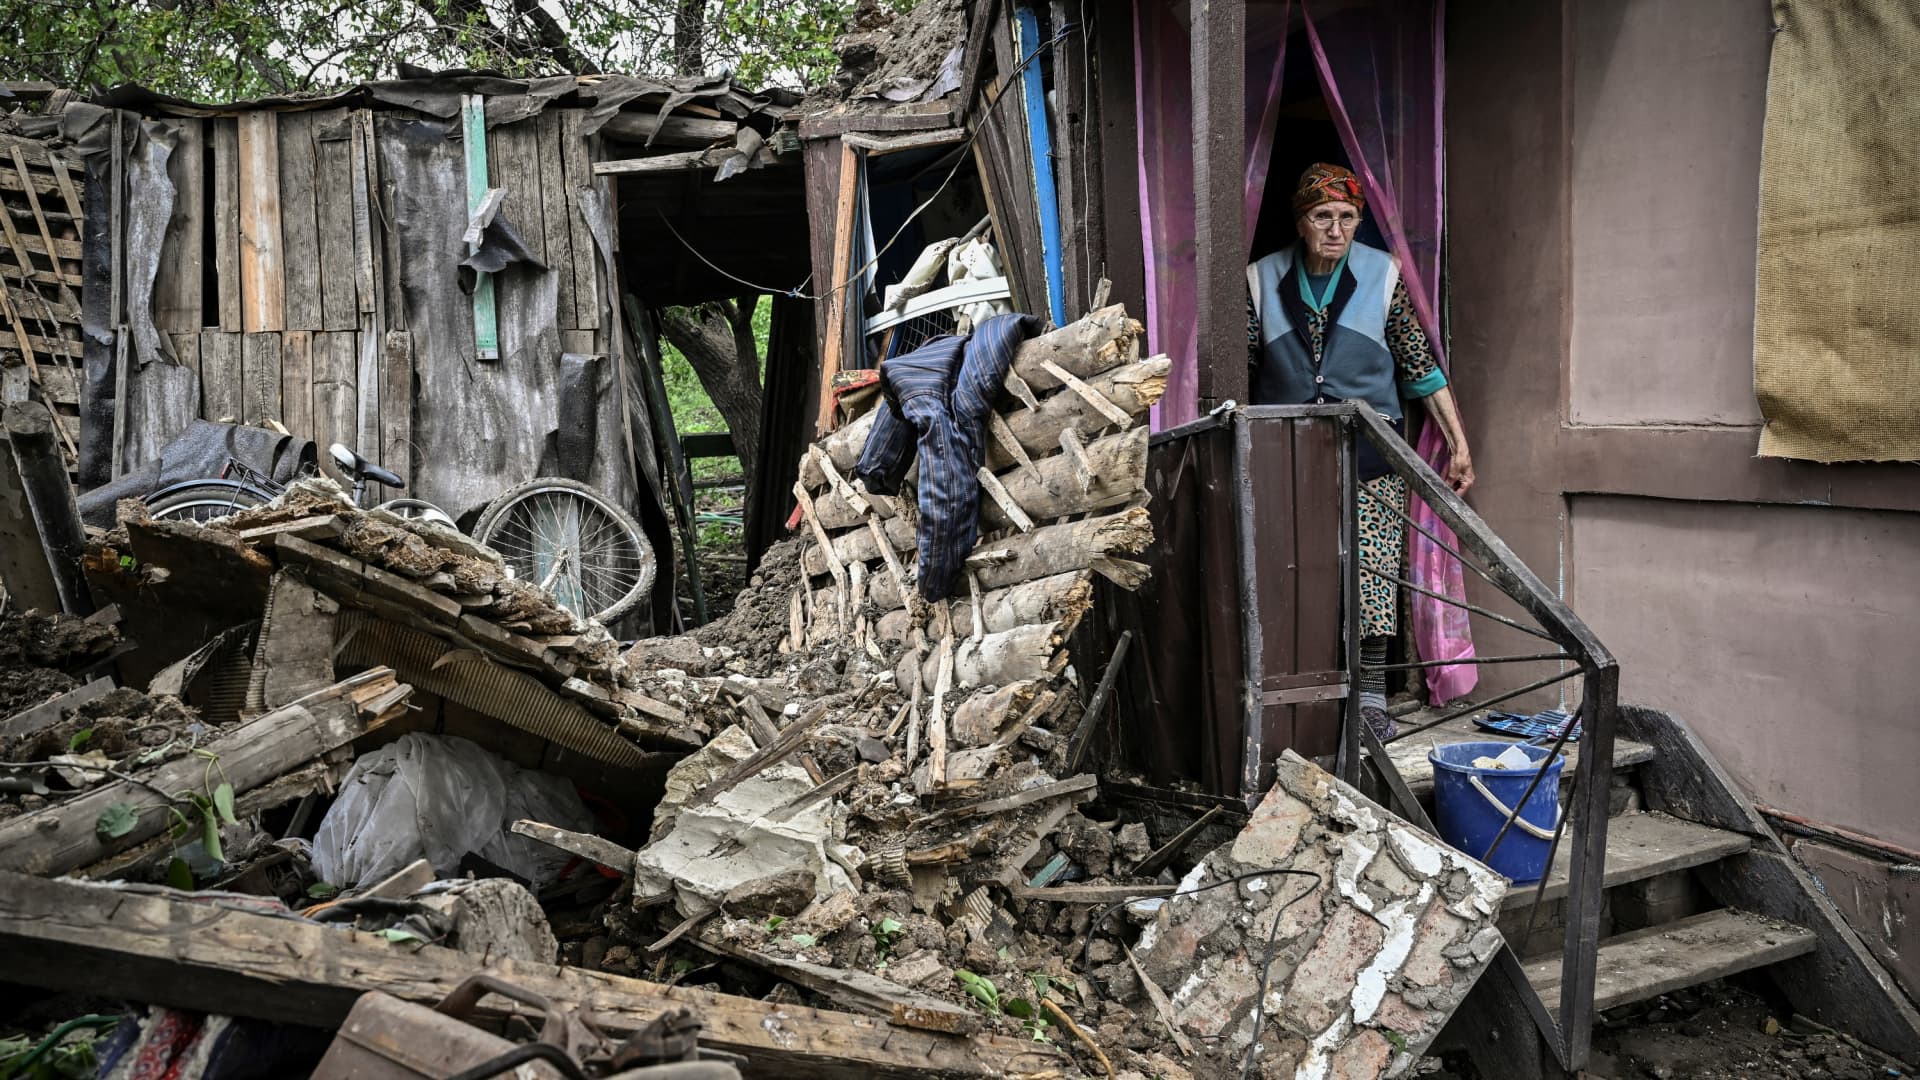 An eldery woman stands inside her heavily damaged house after it was hit by a missile in the city of Bakhmut at the eastern Ukranian region of Donbass on May 22, 2022, amid Russian invasion of Ukraine.